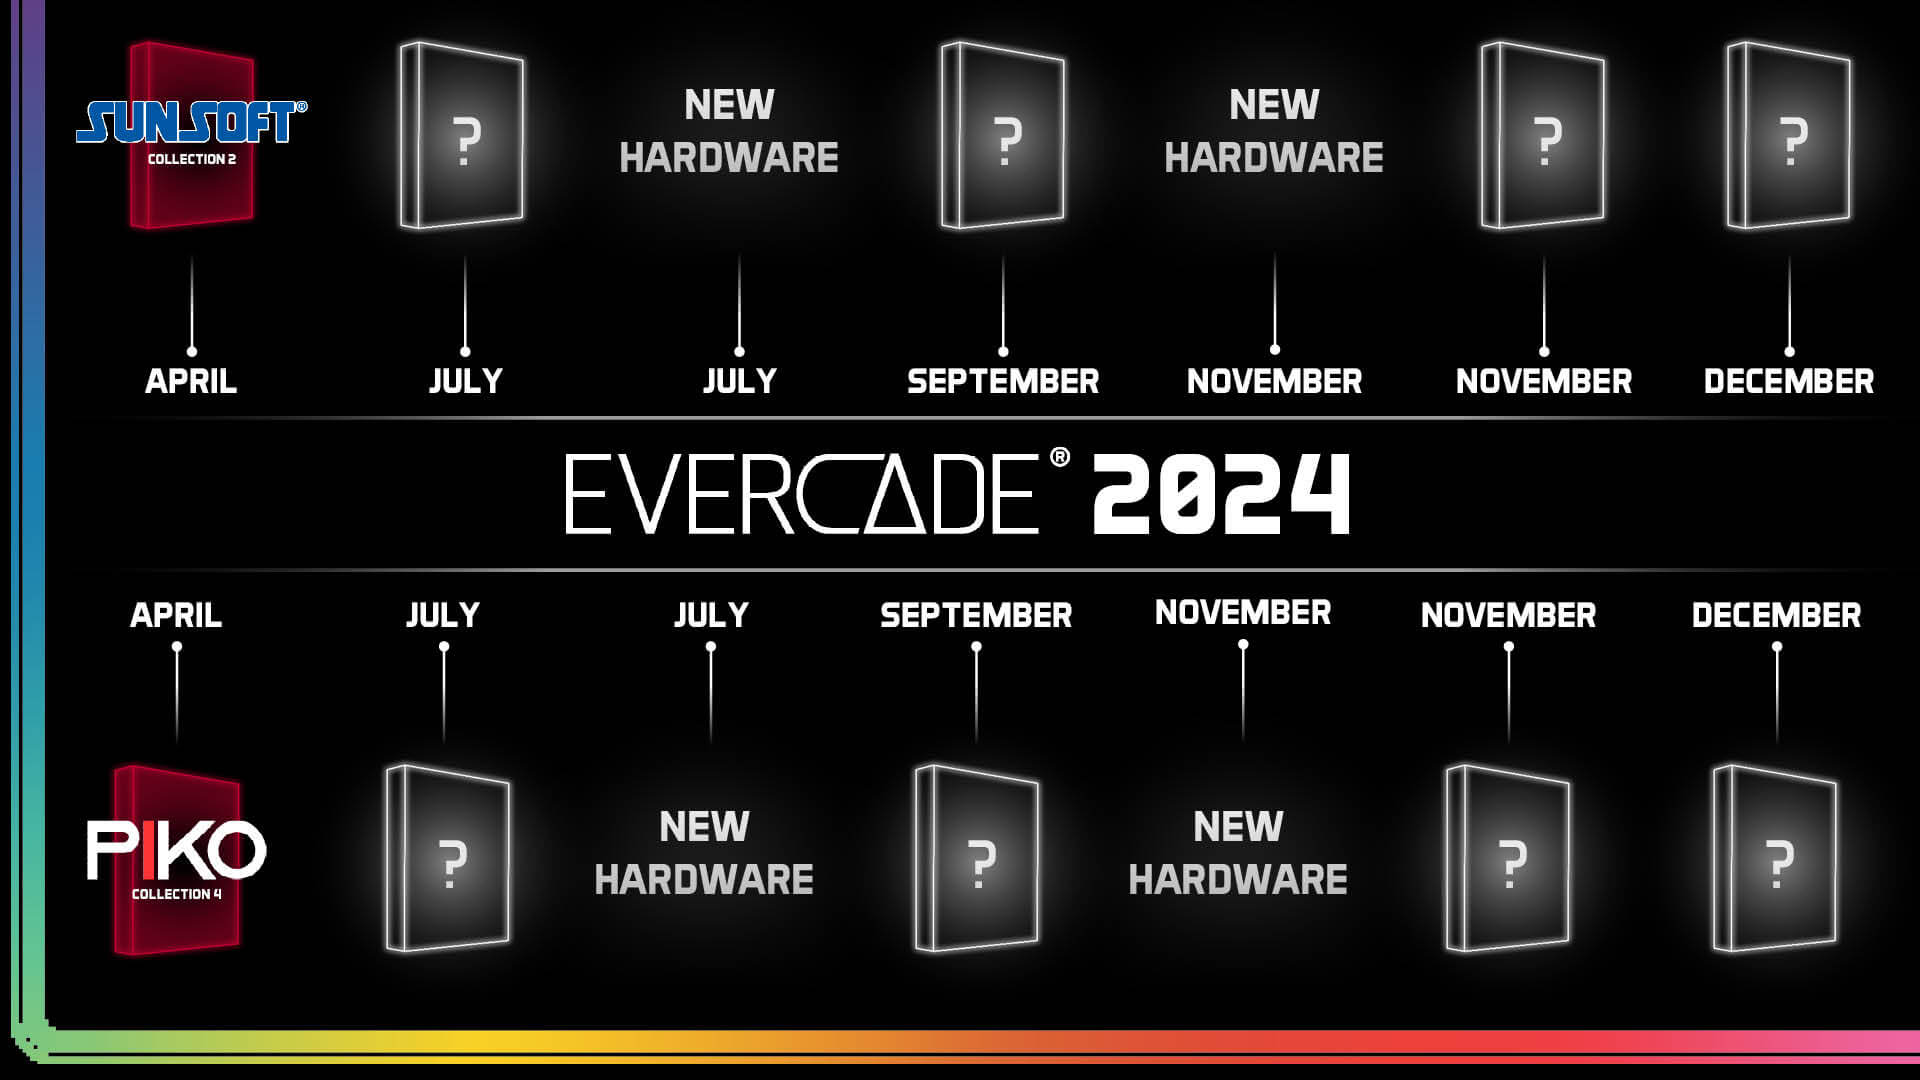 evercade 2024 roadmap timeline showing a schedule for product reveals